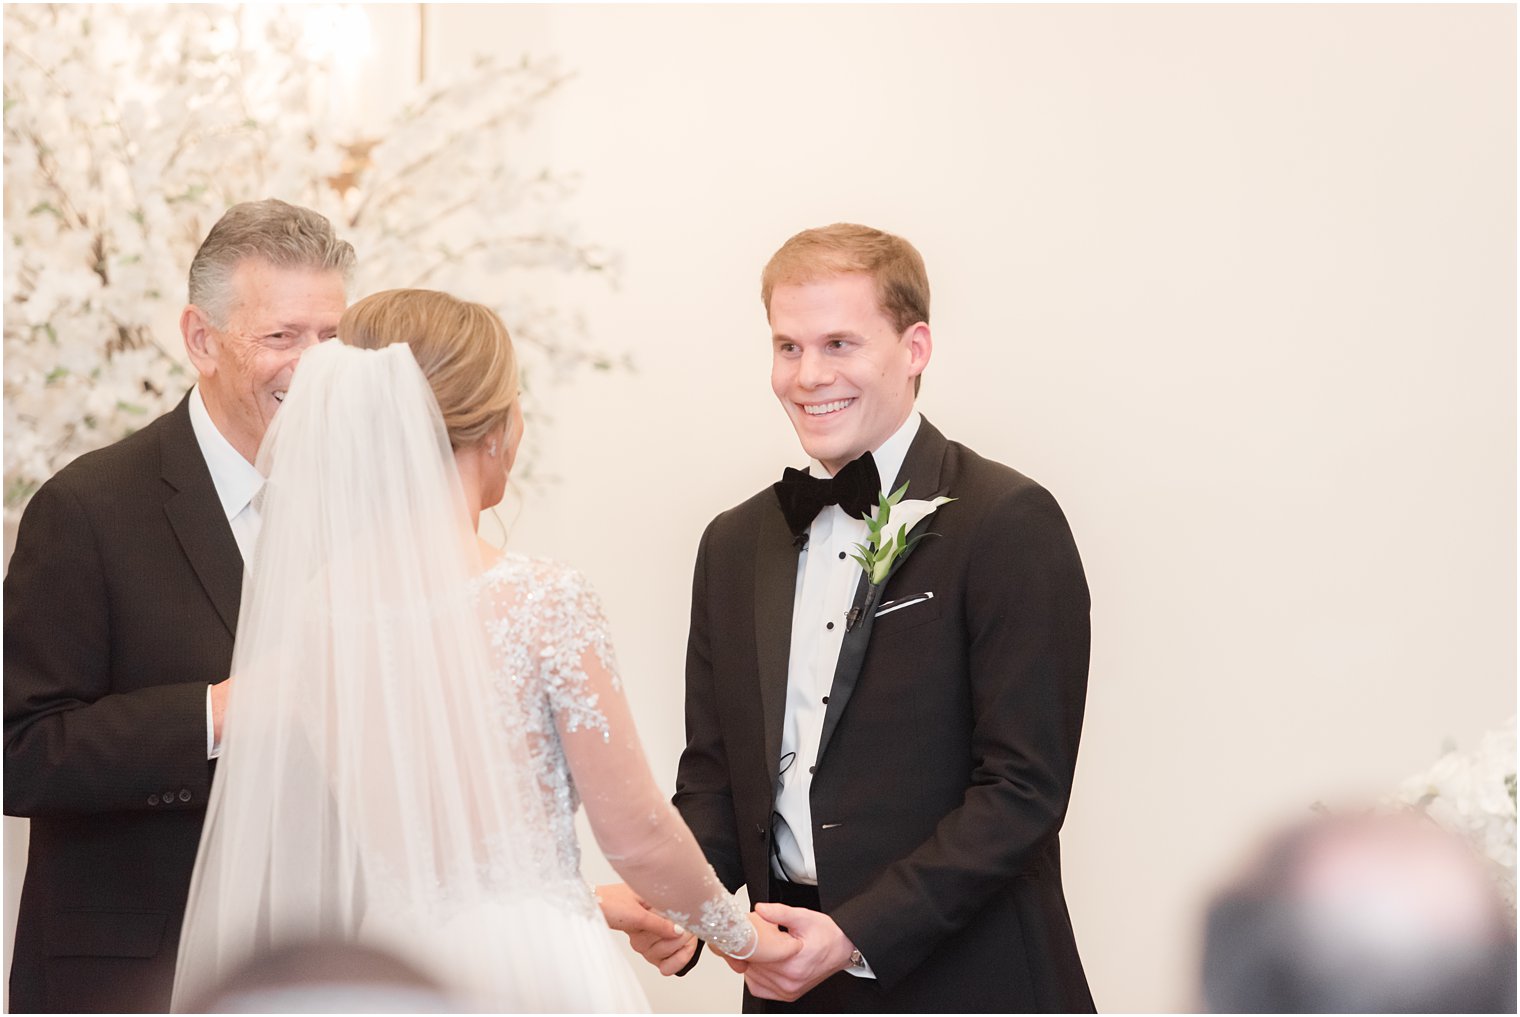 Groom laughing during wedding ceremony at Park Chateau Chapel| Winter wedding by Idalia Photography Associates